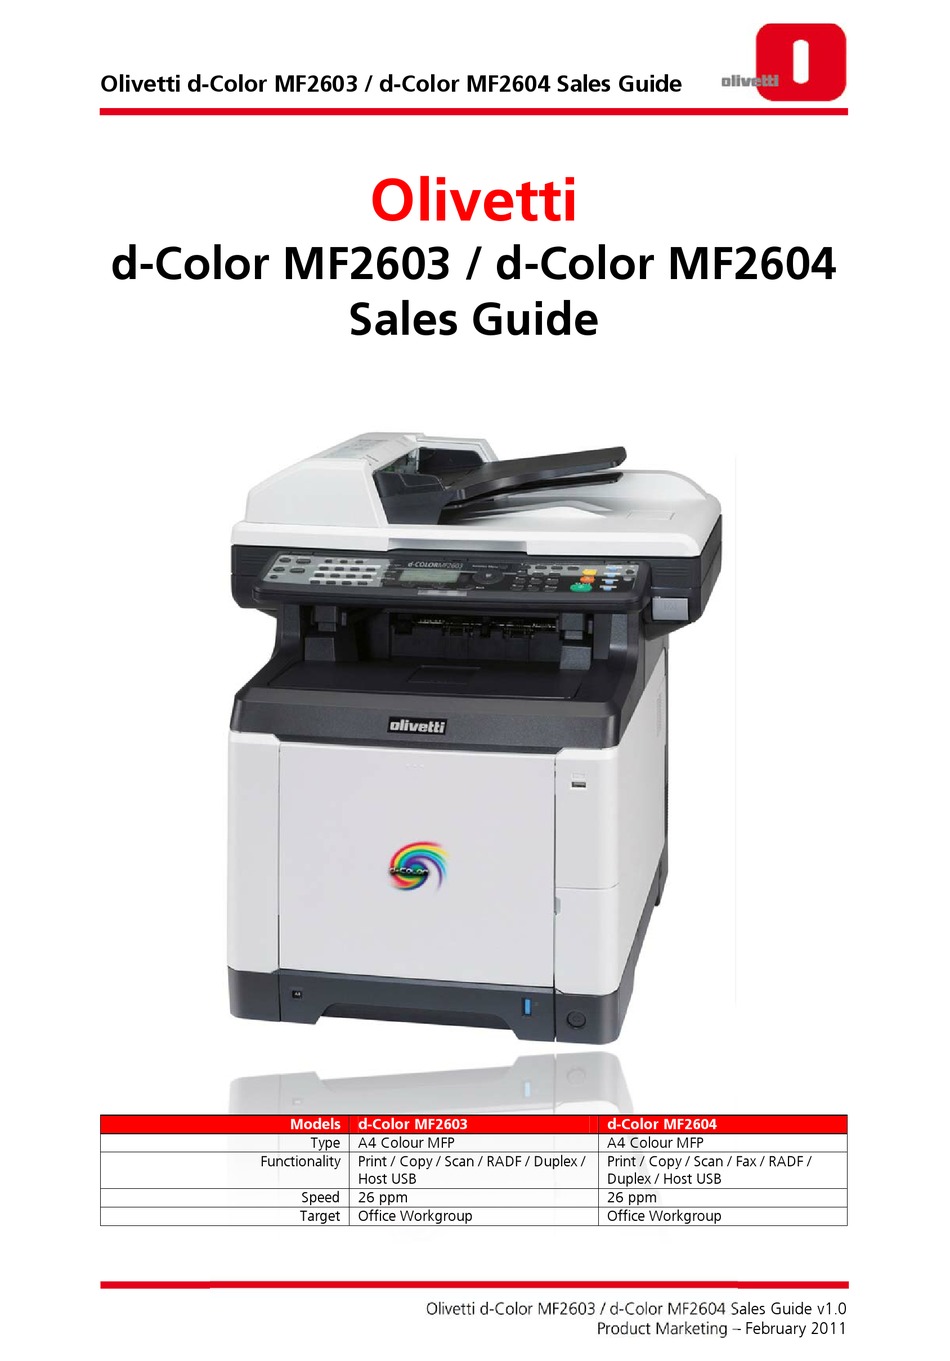 d-Color MF2603 and d-Color MF2604